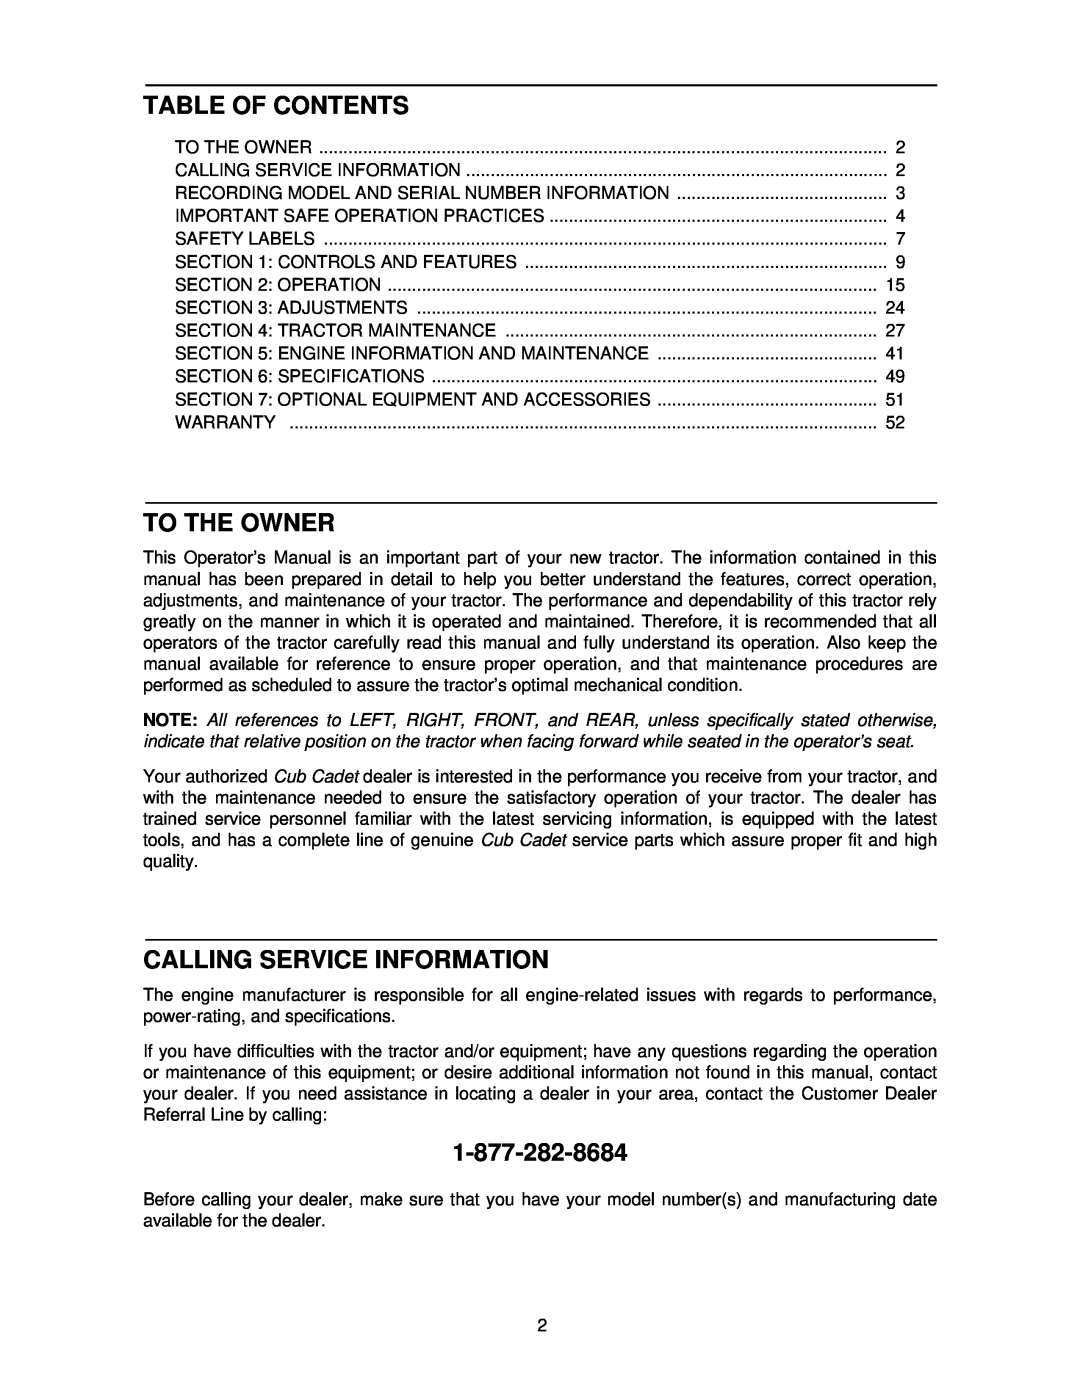 Cub Cadet 7264 manual Table Of Contents, To The Owner, Calling Service Information 